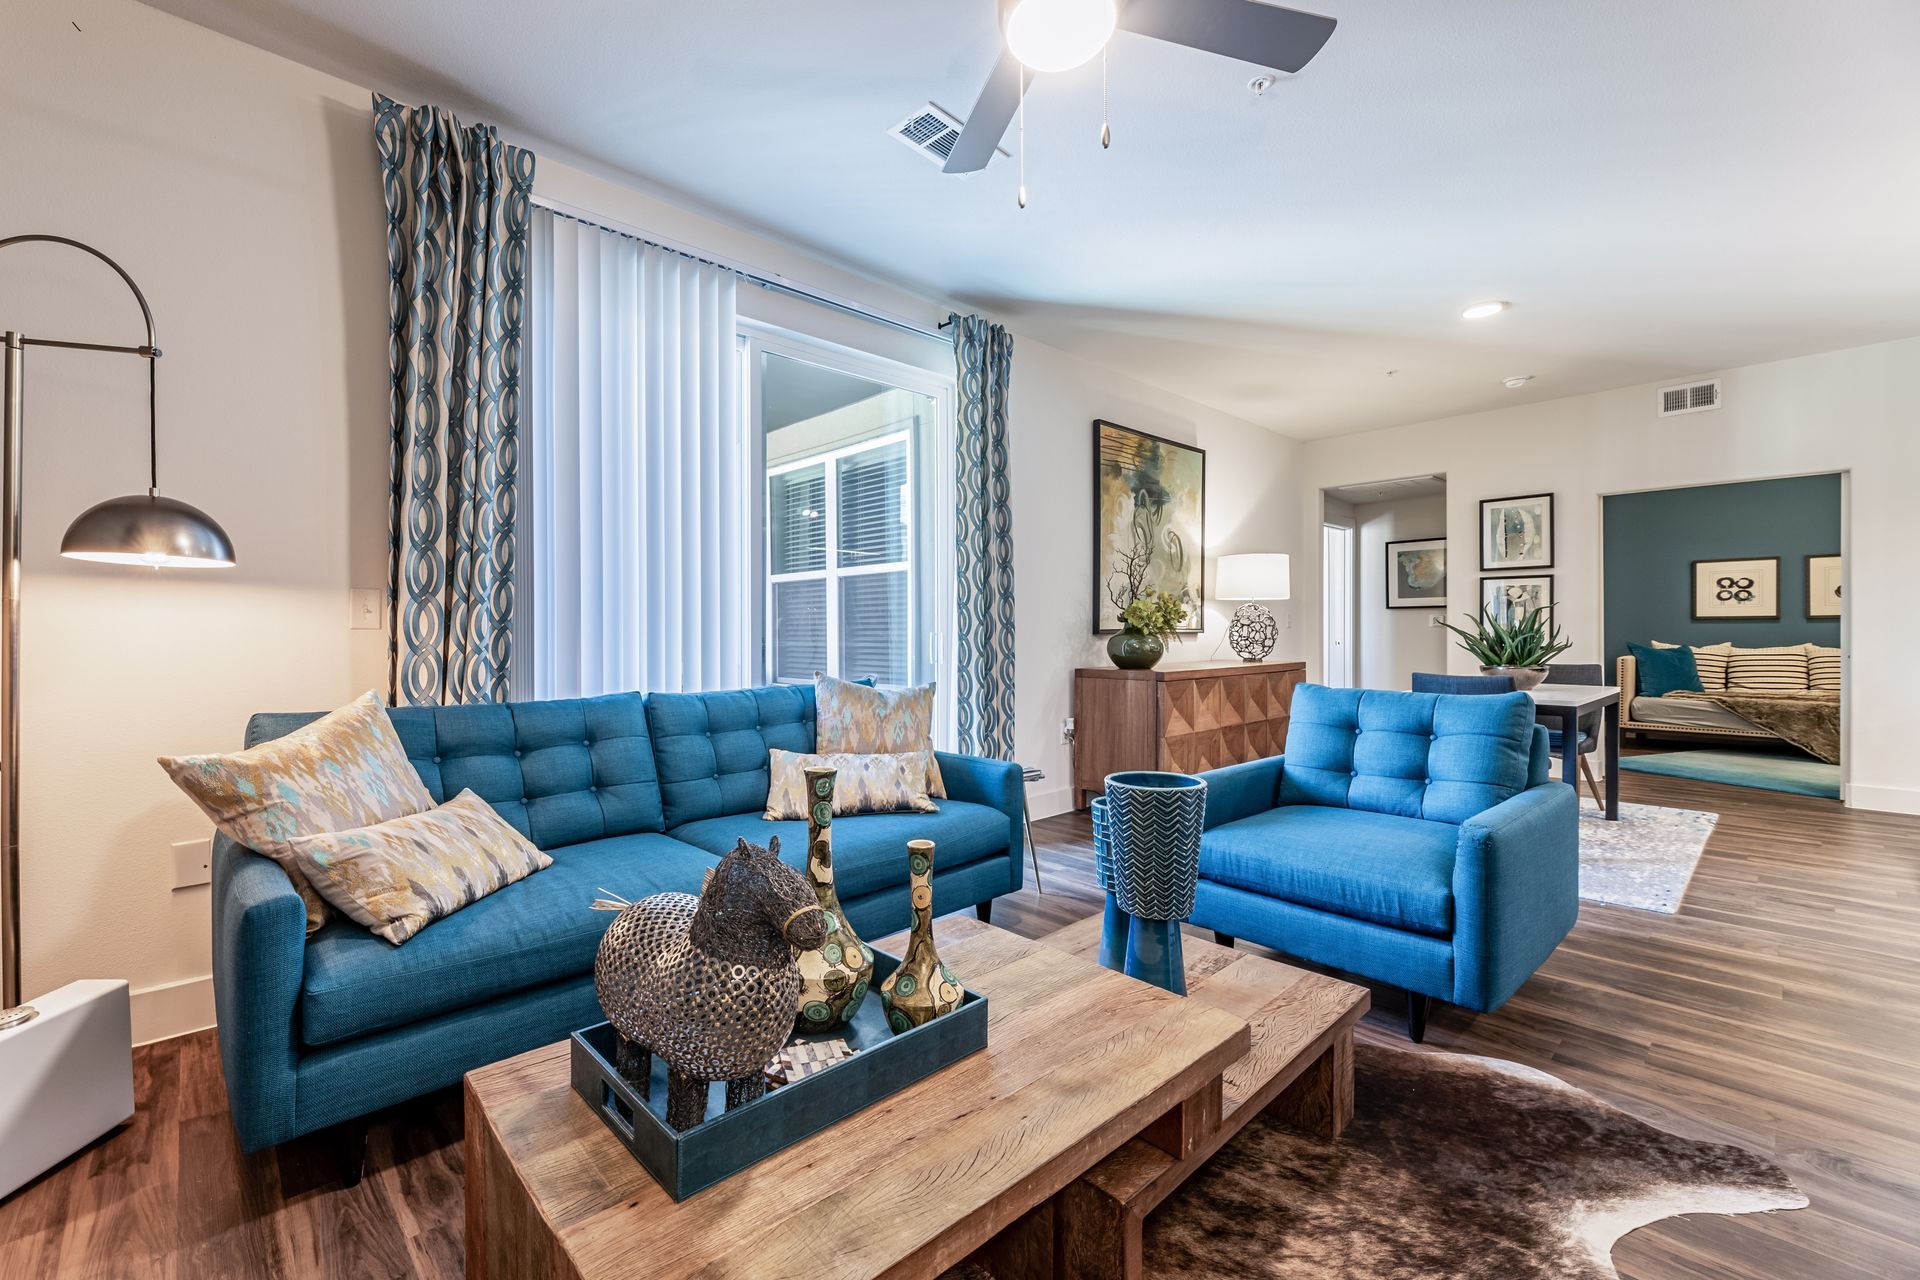 Parkside at Craig Ranch apartment living room with two blue couches, a coffee table, and a ceiling fan.